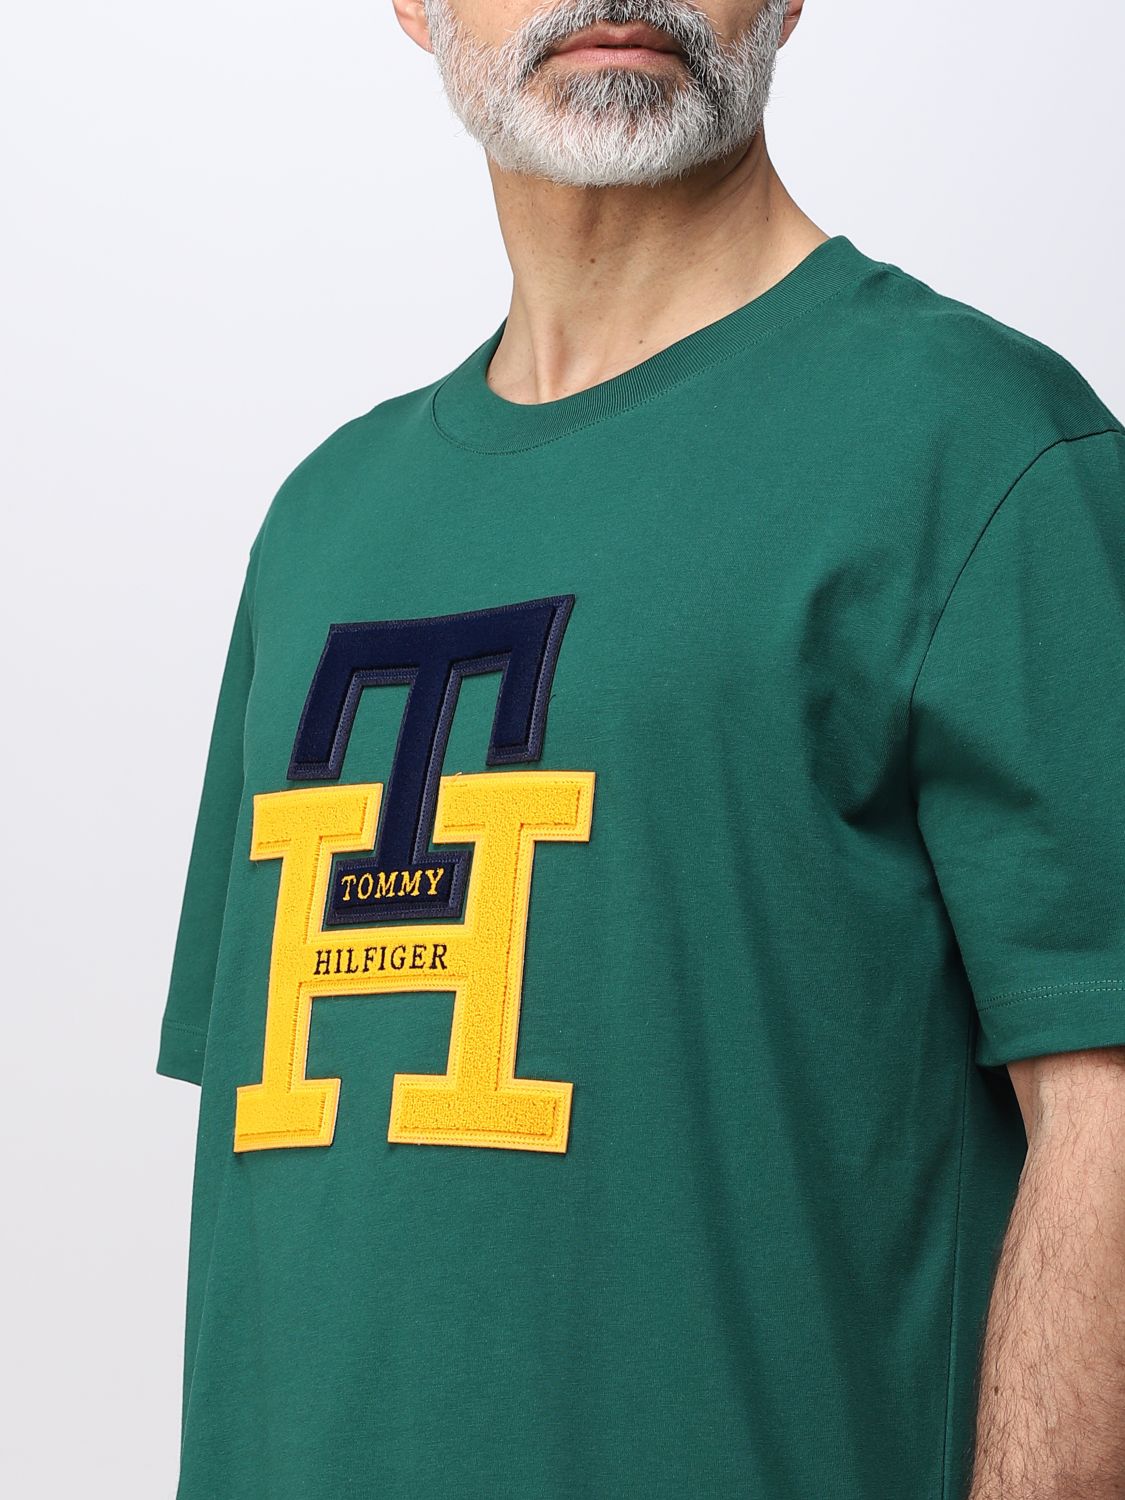 TOMMY HILFIGER: for man - Green | Tommy Hilfiger t-shirt MW0MW29597 online on GIGLIO.COM